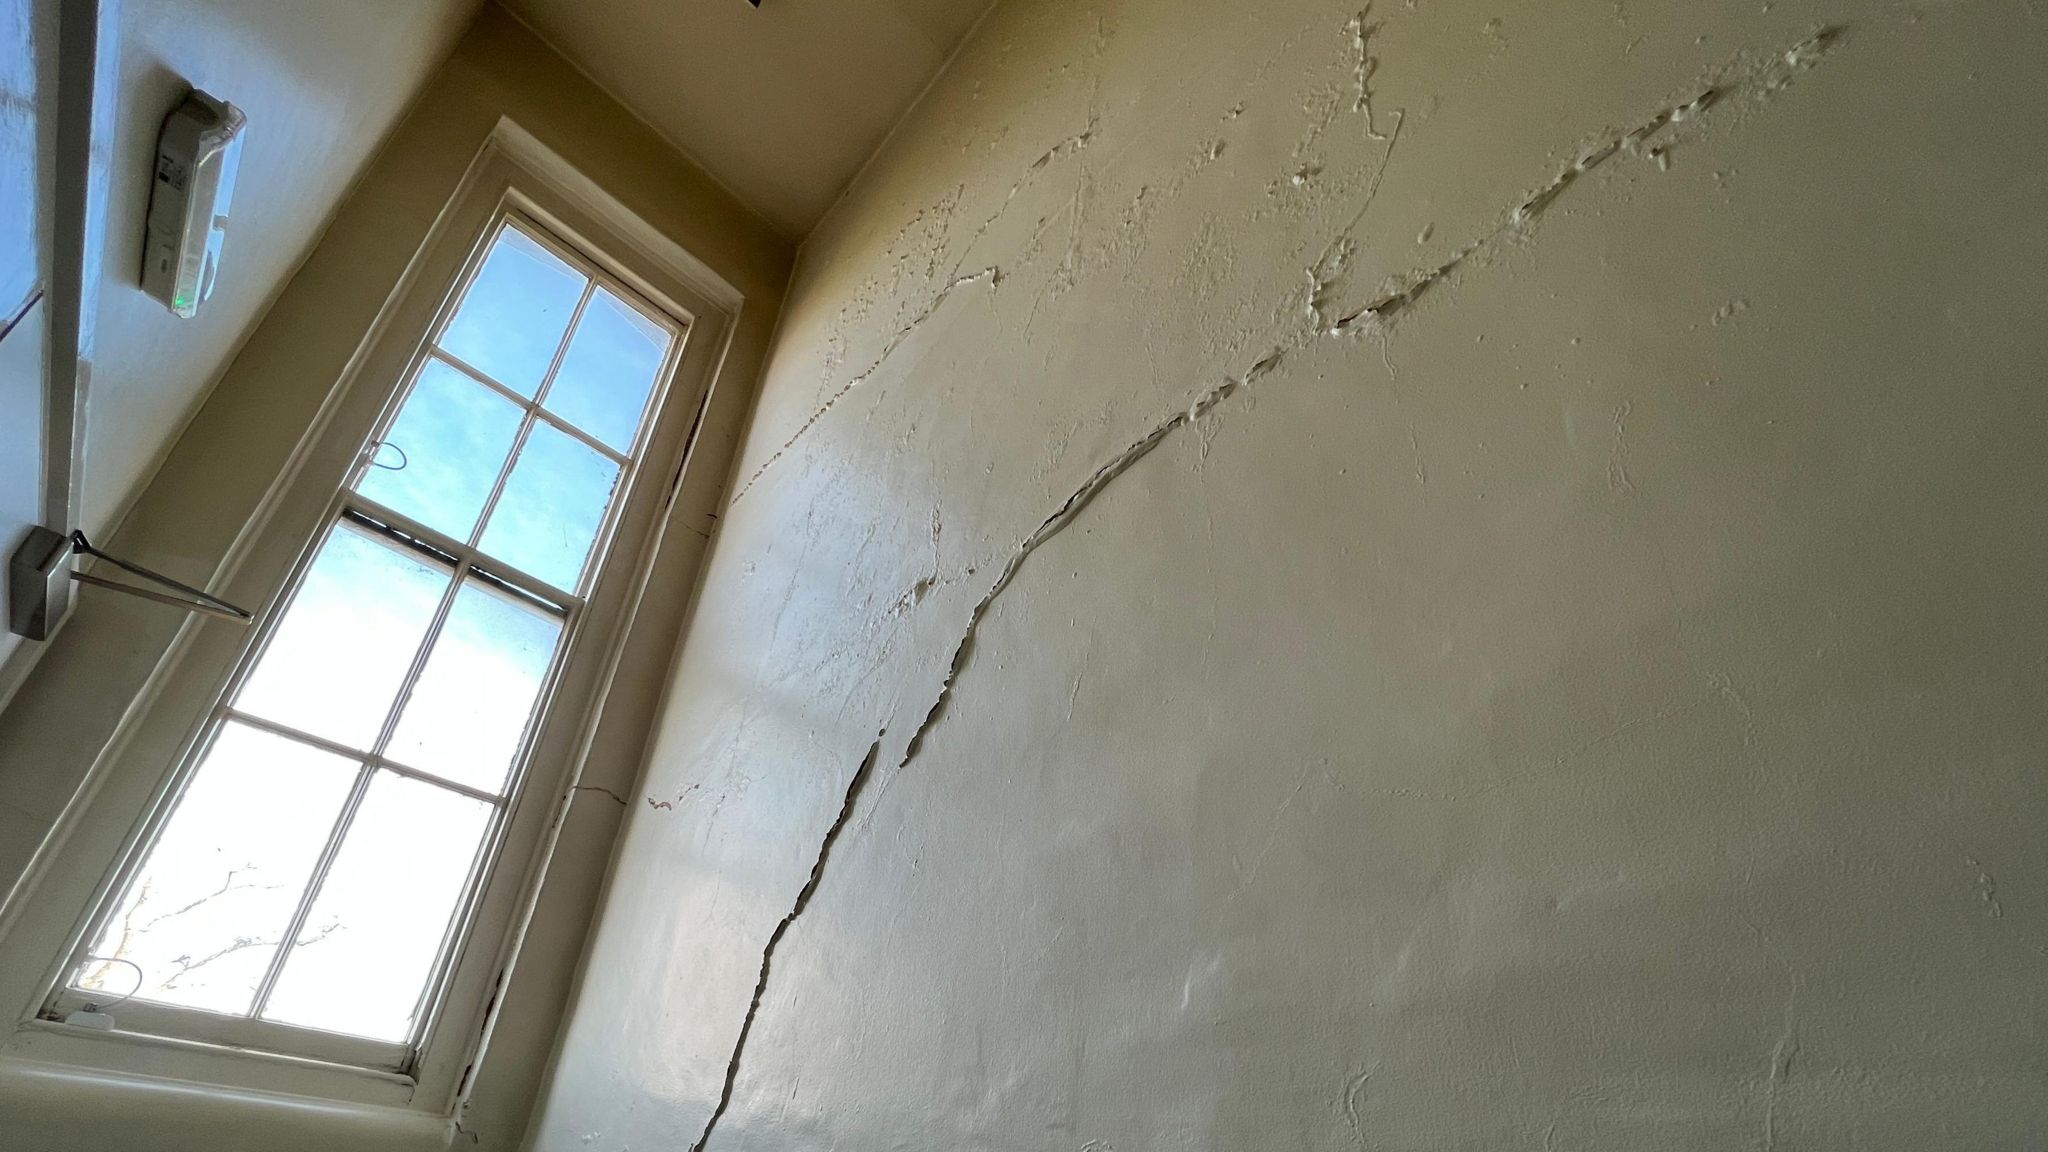 Cracks in a wall at St Peter's Hospital, Maldon